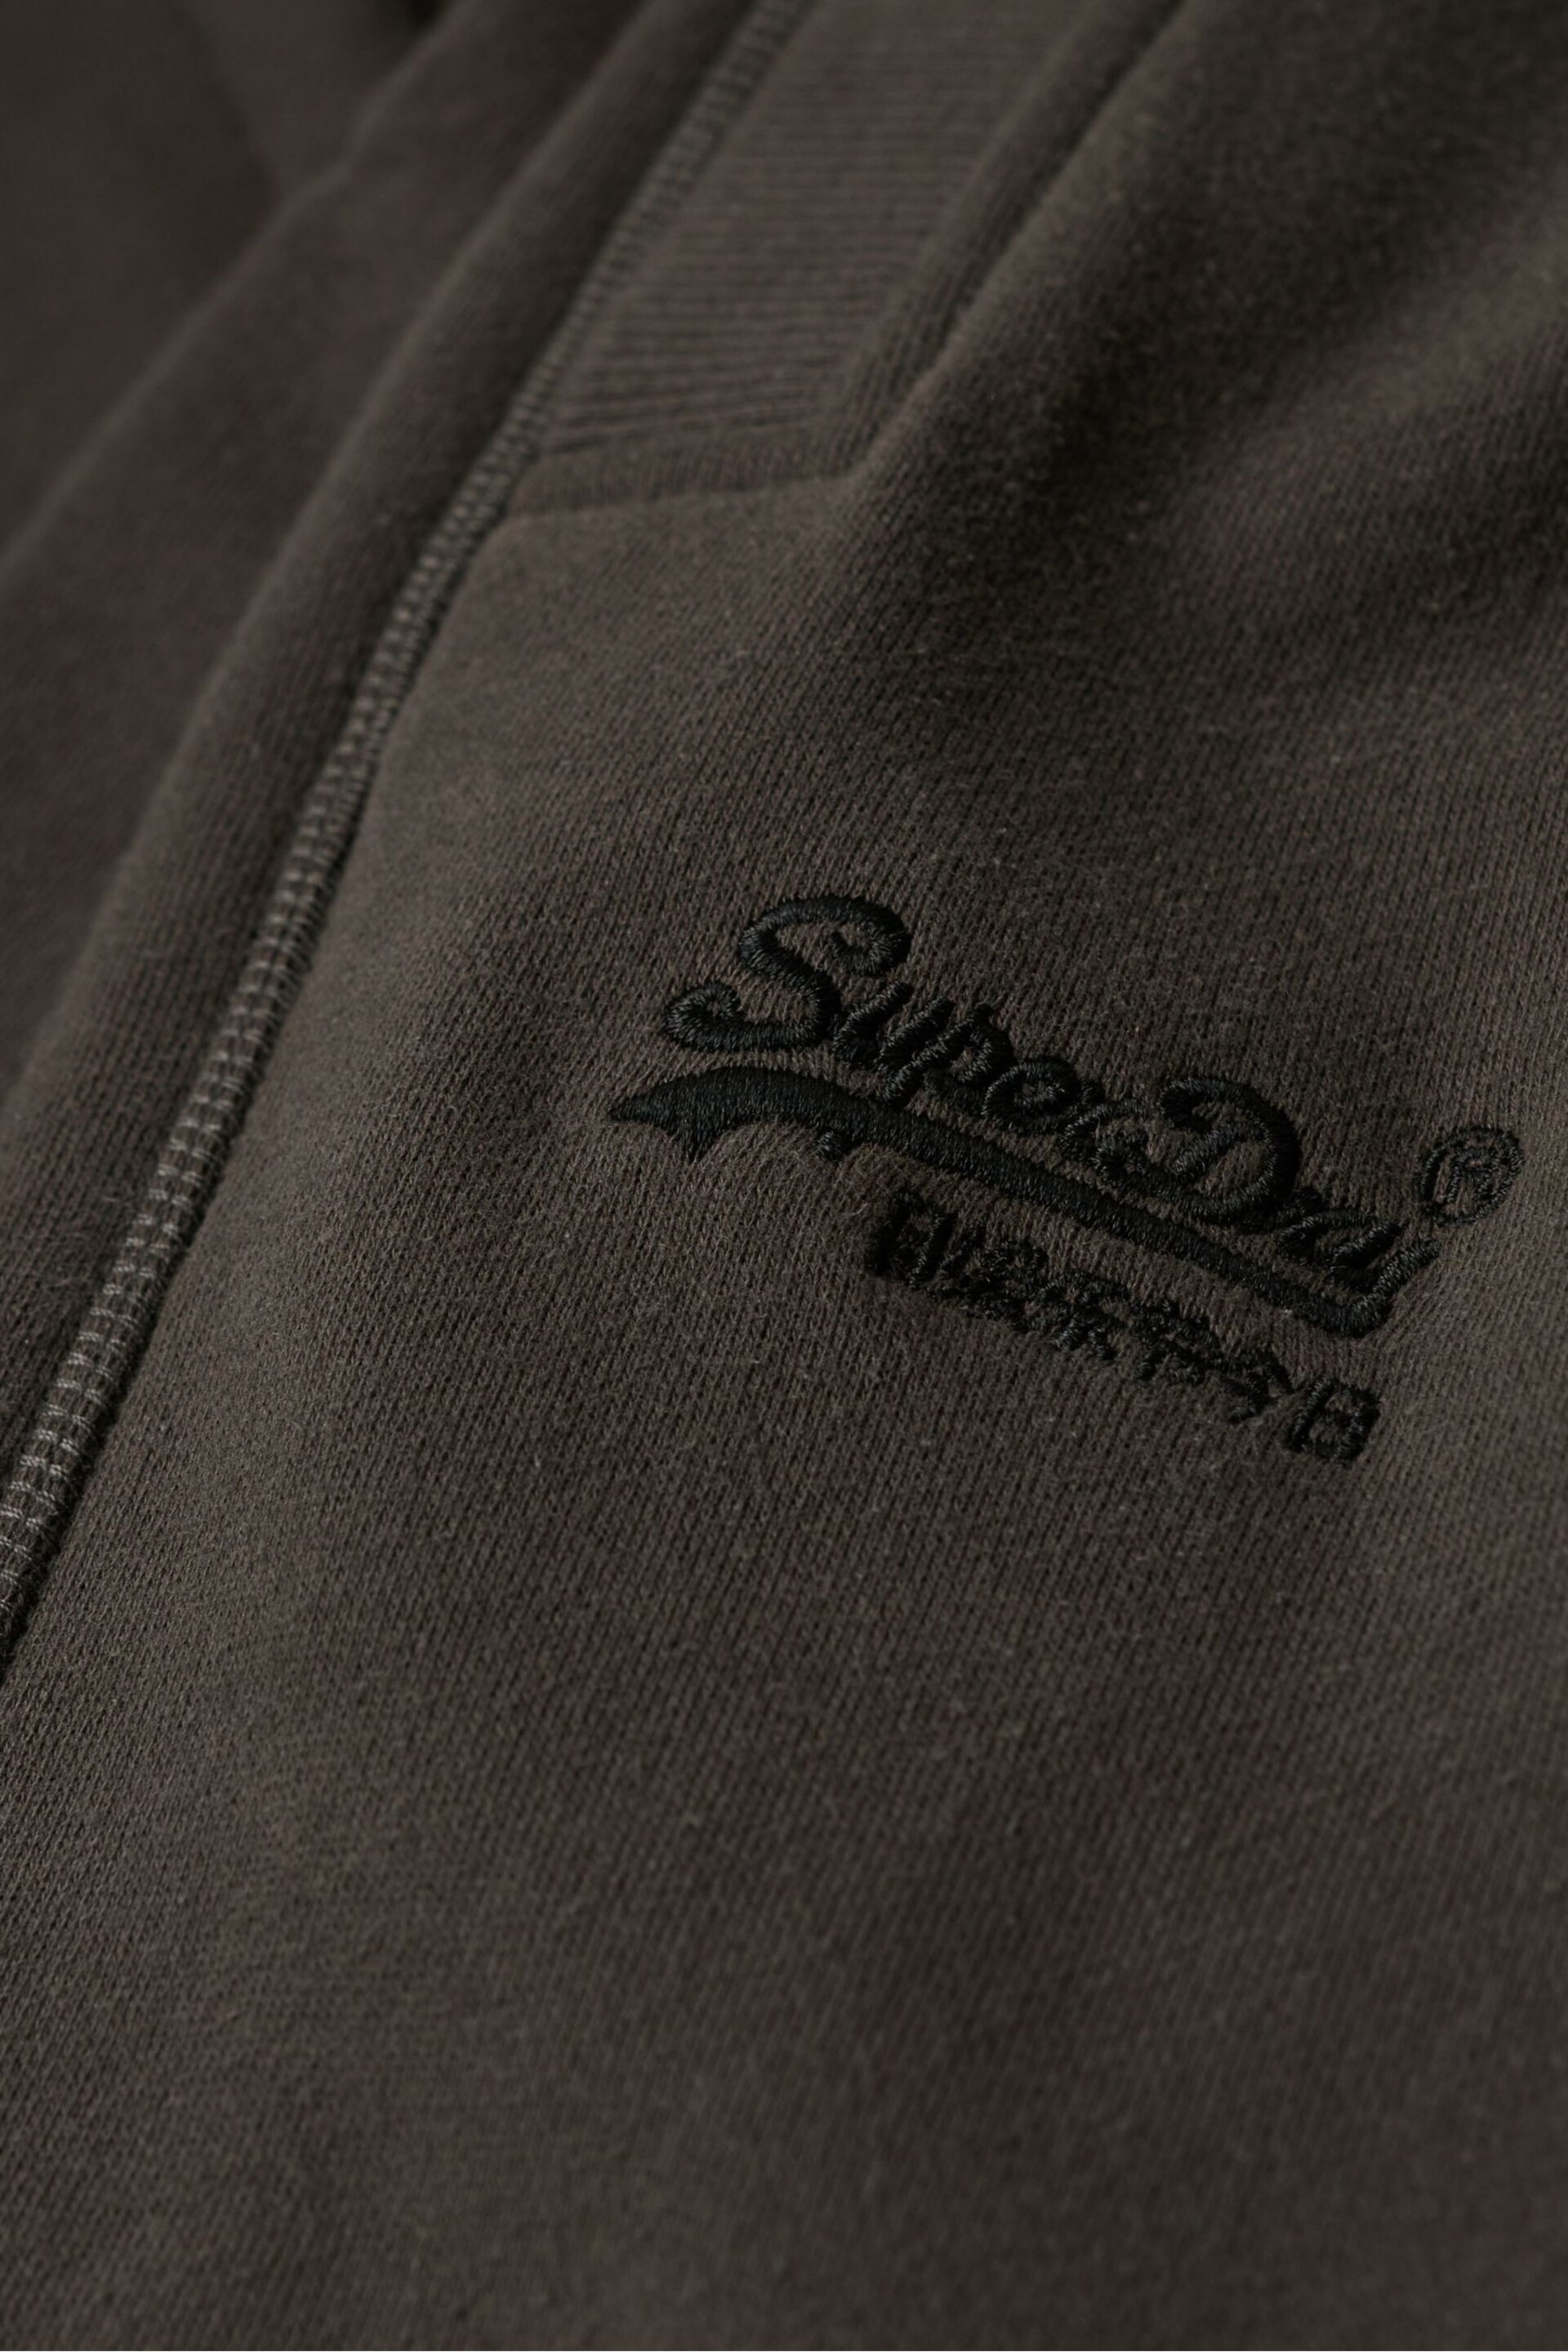 Superdry Black Essential Logo Joggers - Image 7 of 7